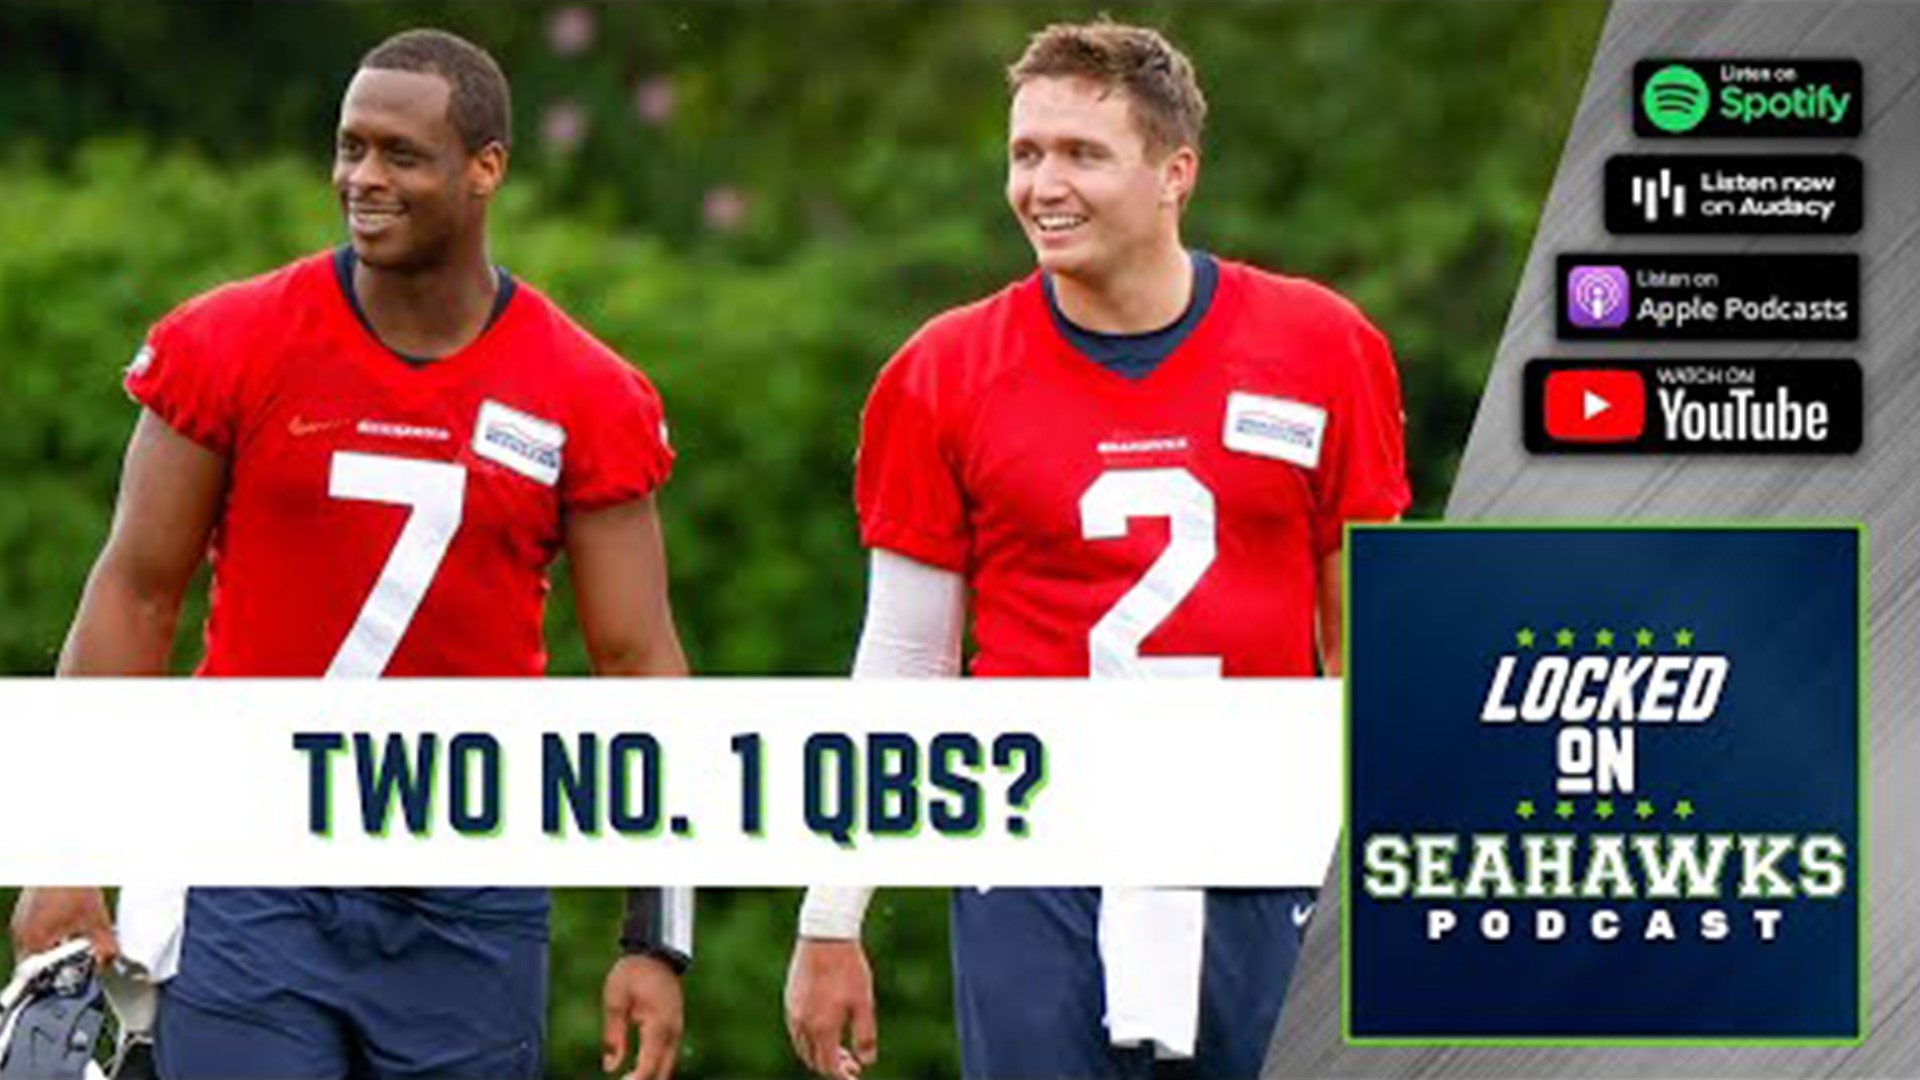 Nearly a month into preparation for the 2022 season, the Seahawks still have the starting quarterback gig up for grabs